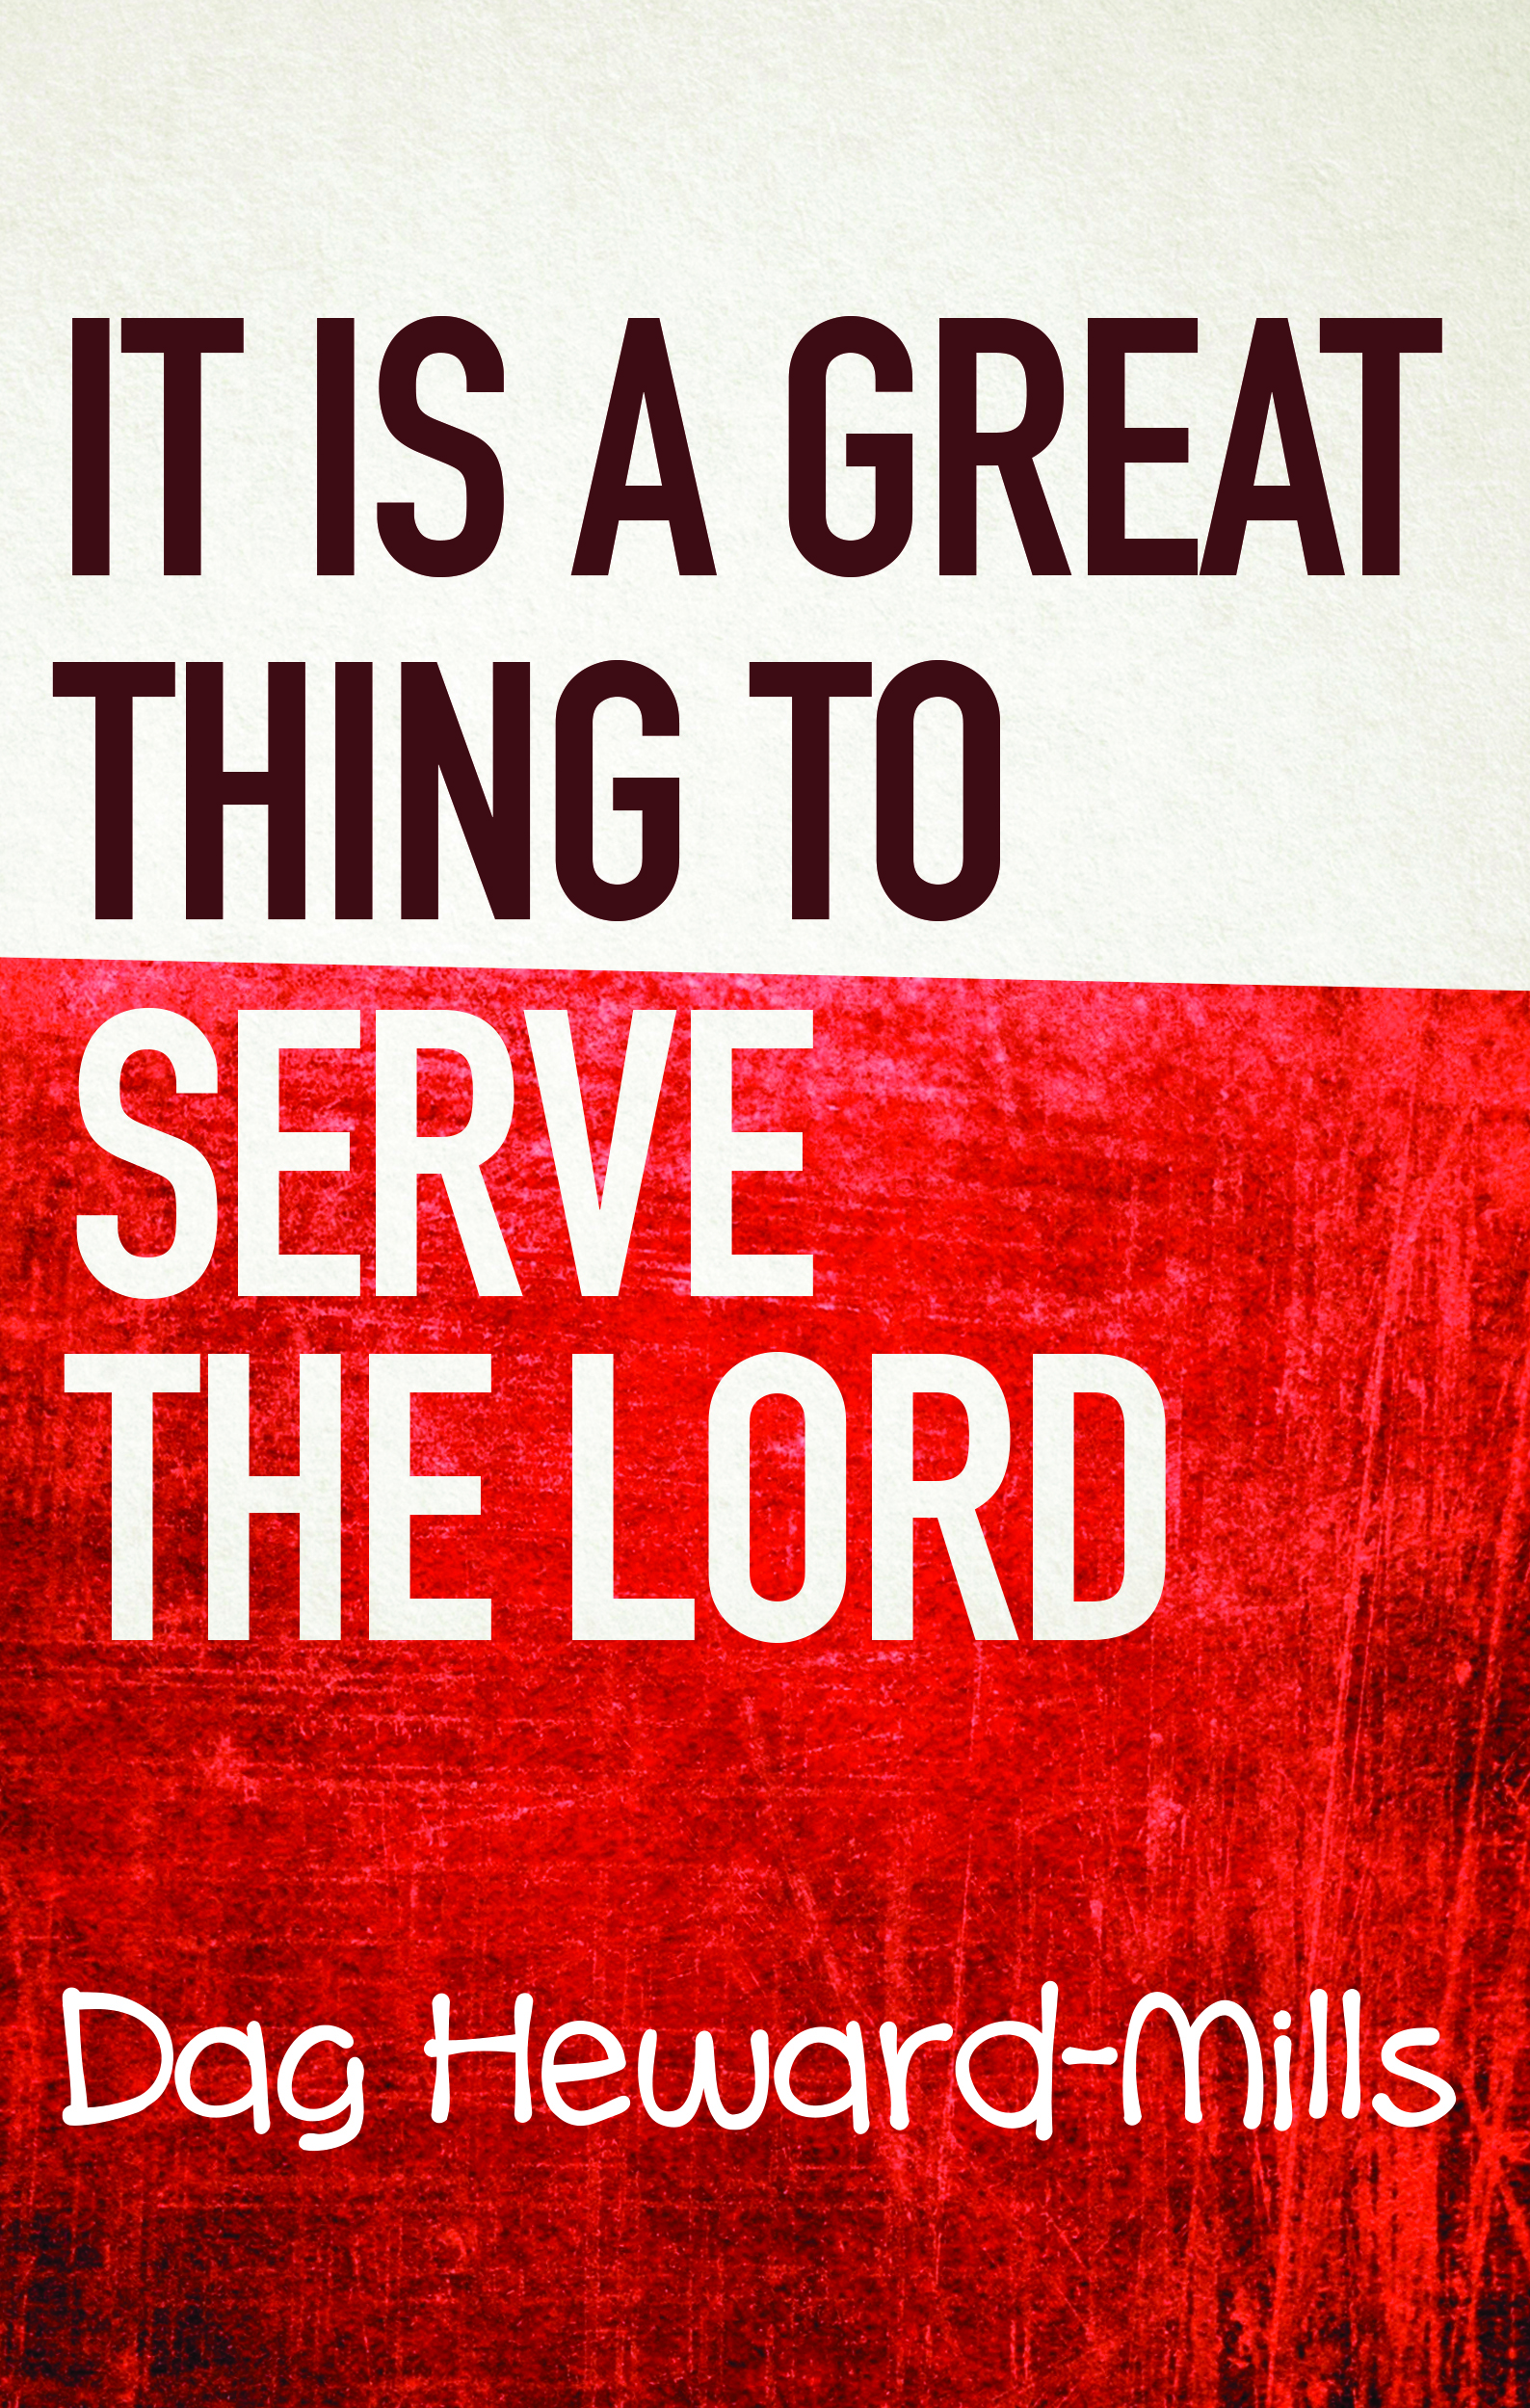 It is a Great Thing to Serve The Lord by Dag Heward-Mills